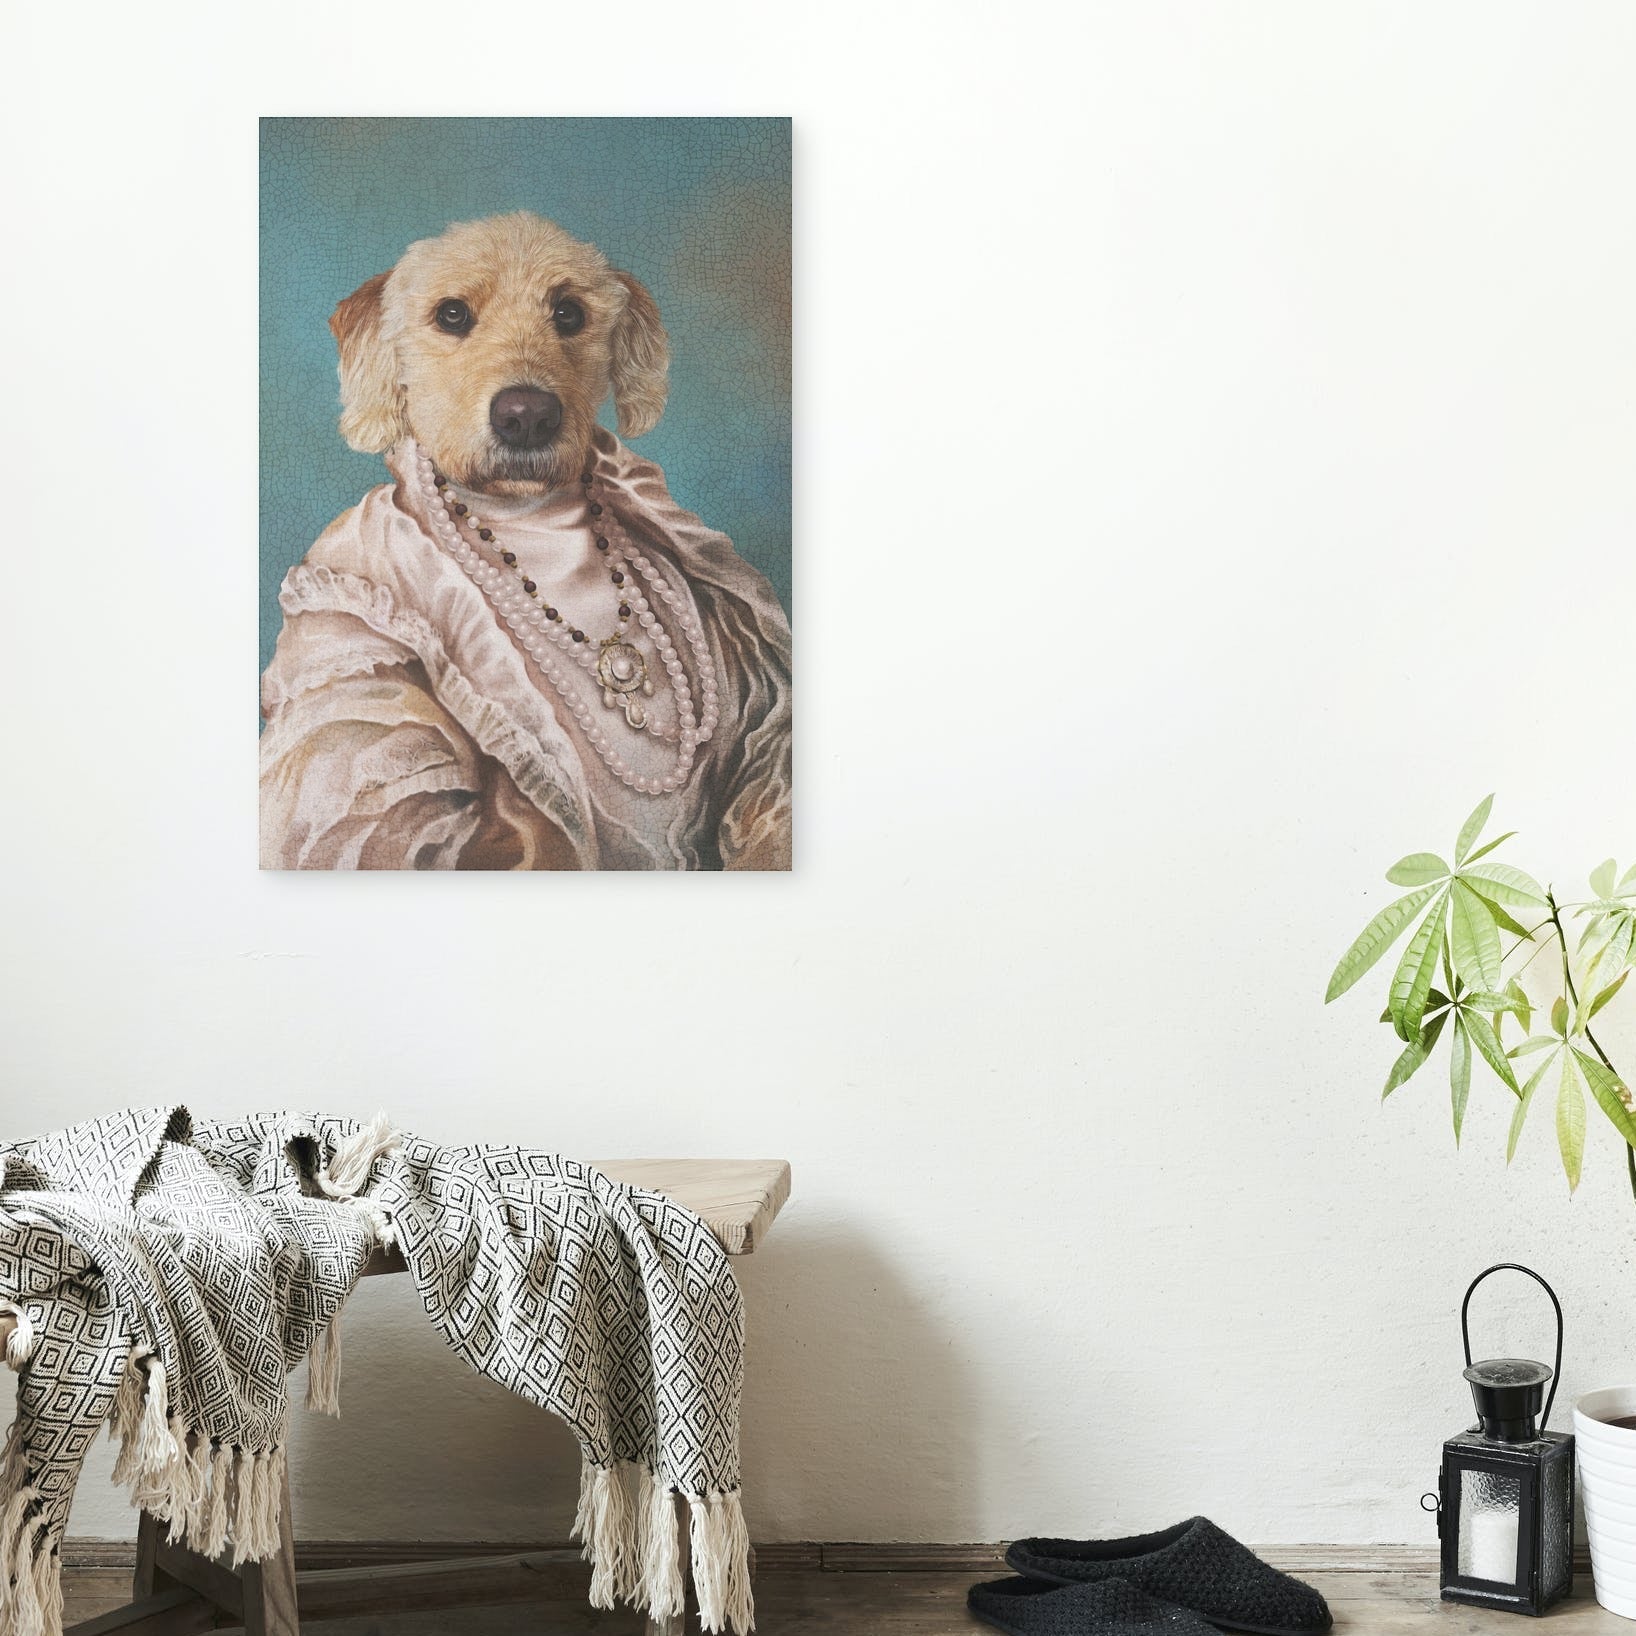 Countess II - Unique Canvas Of Your Pet